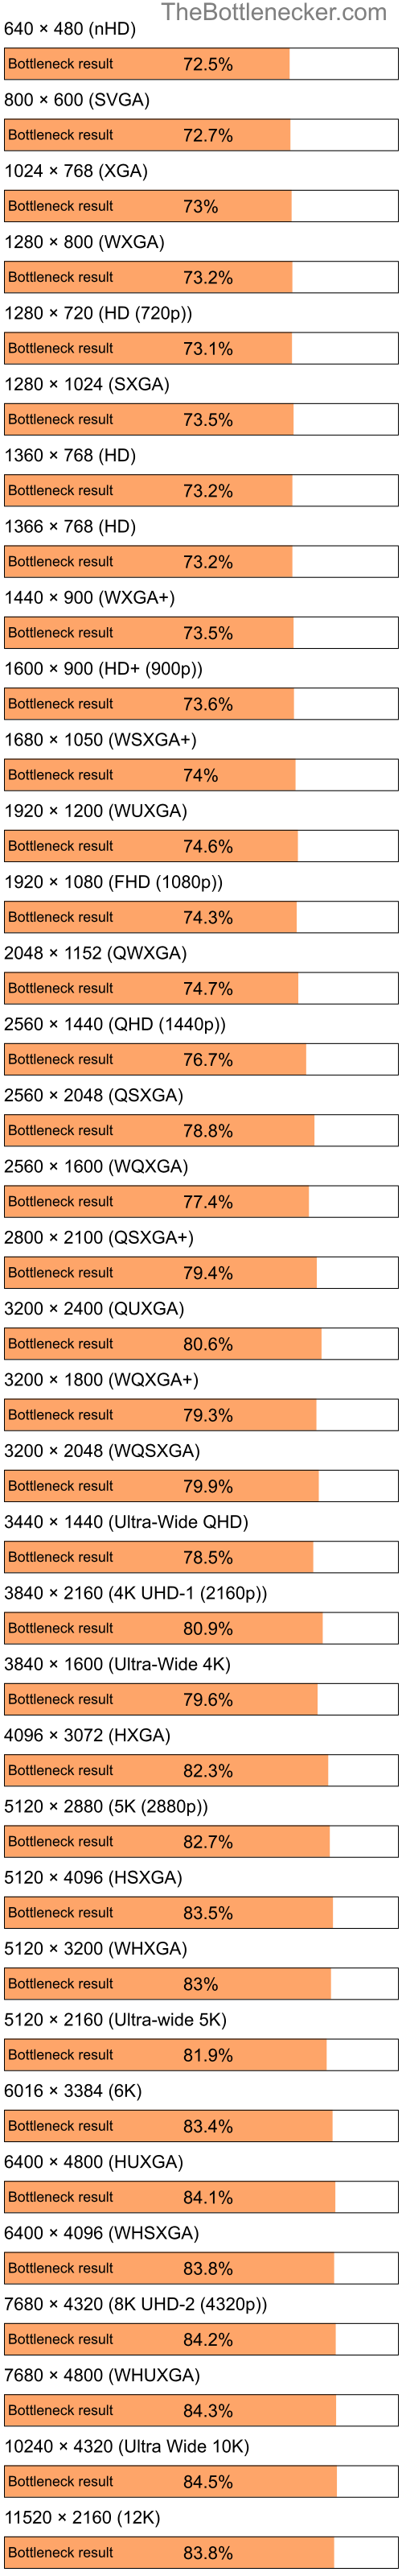 Bottleneck results by resolution for Intel Pentium 4 and AMD Radeon X1050 in General Tasks